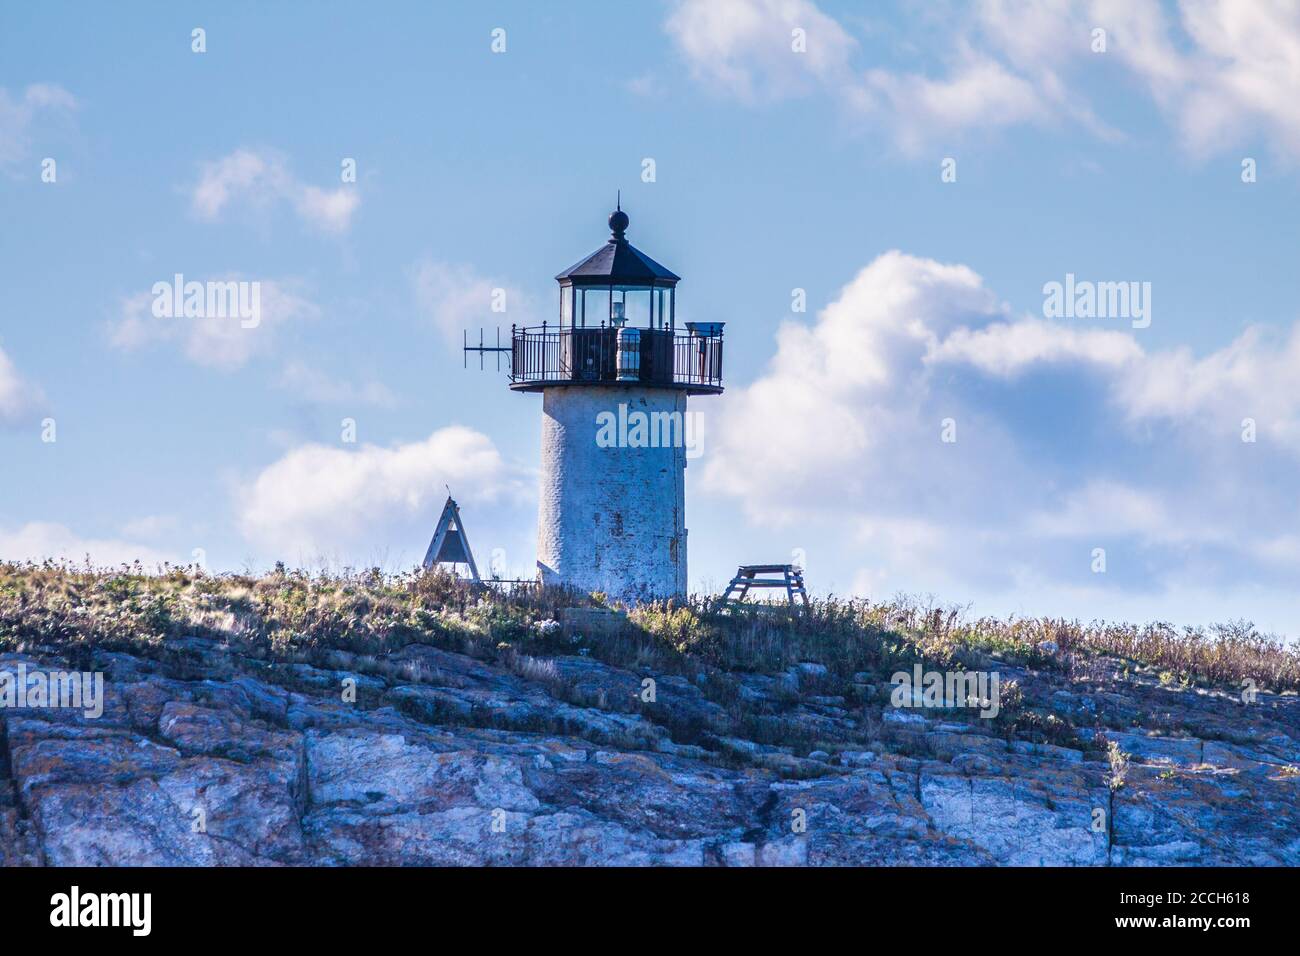 Pond Island Lighthouse, located on Pond Island at the mouth of the  Kennebec River in Maine, was established in 1821 and replaced in 1855. Stock Photo